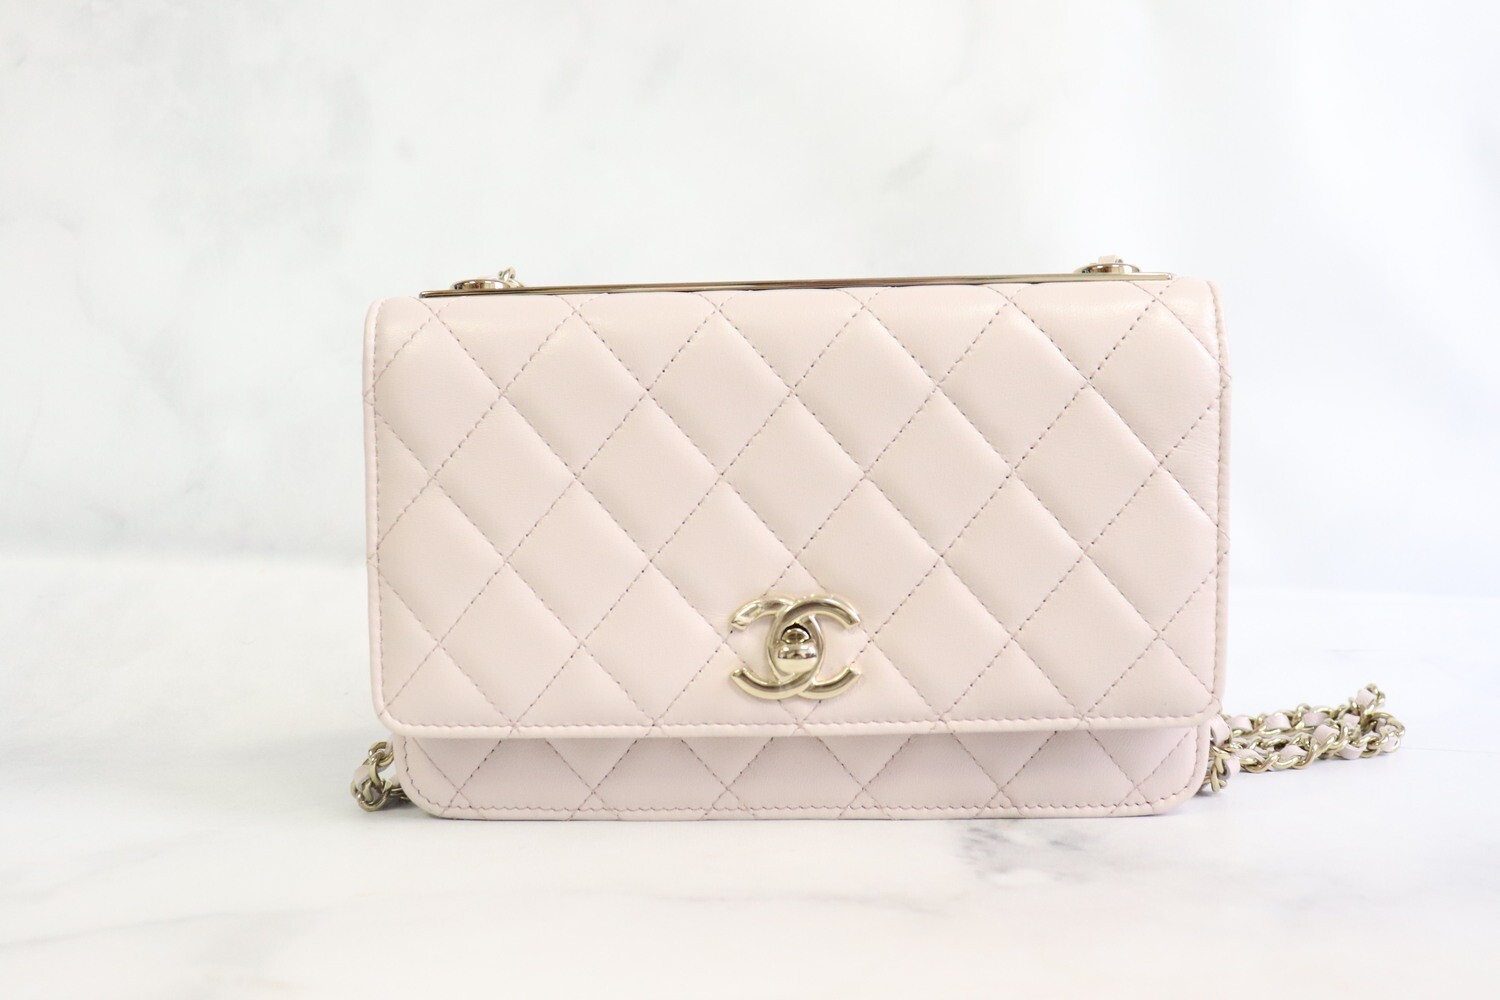 Chanel Trendy Wallet on Chain, Light Lilac Lambskin Leather, Shiny Gold Hardware, Preowned in Box